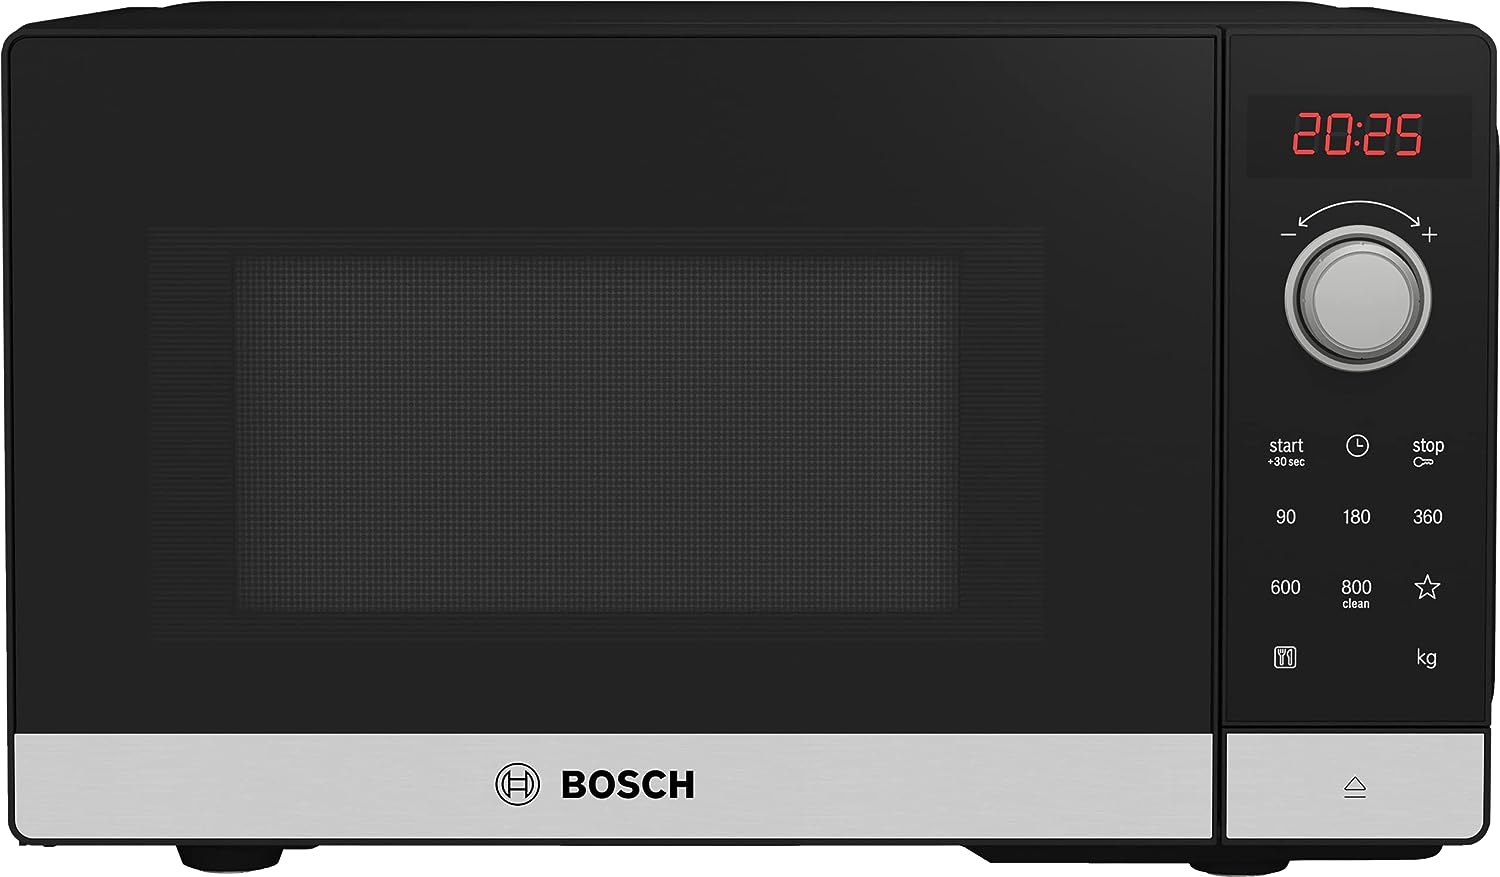 Bosch FFL023MS2 Series 2 Microwave, 26 x 44 cm, 800 W, Turntable 27 cm, Door Hinge Left, AutoPilot 7 7 Automatic Programmes, Cleaning Support, LED Touch Display, Stainless Steel